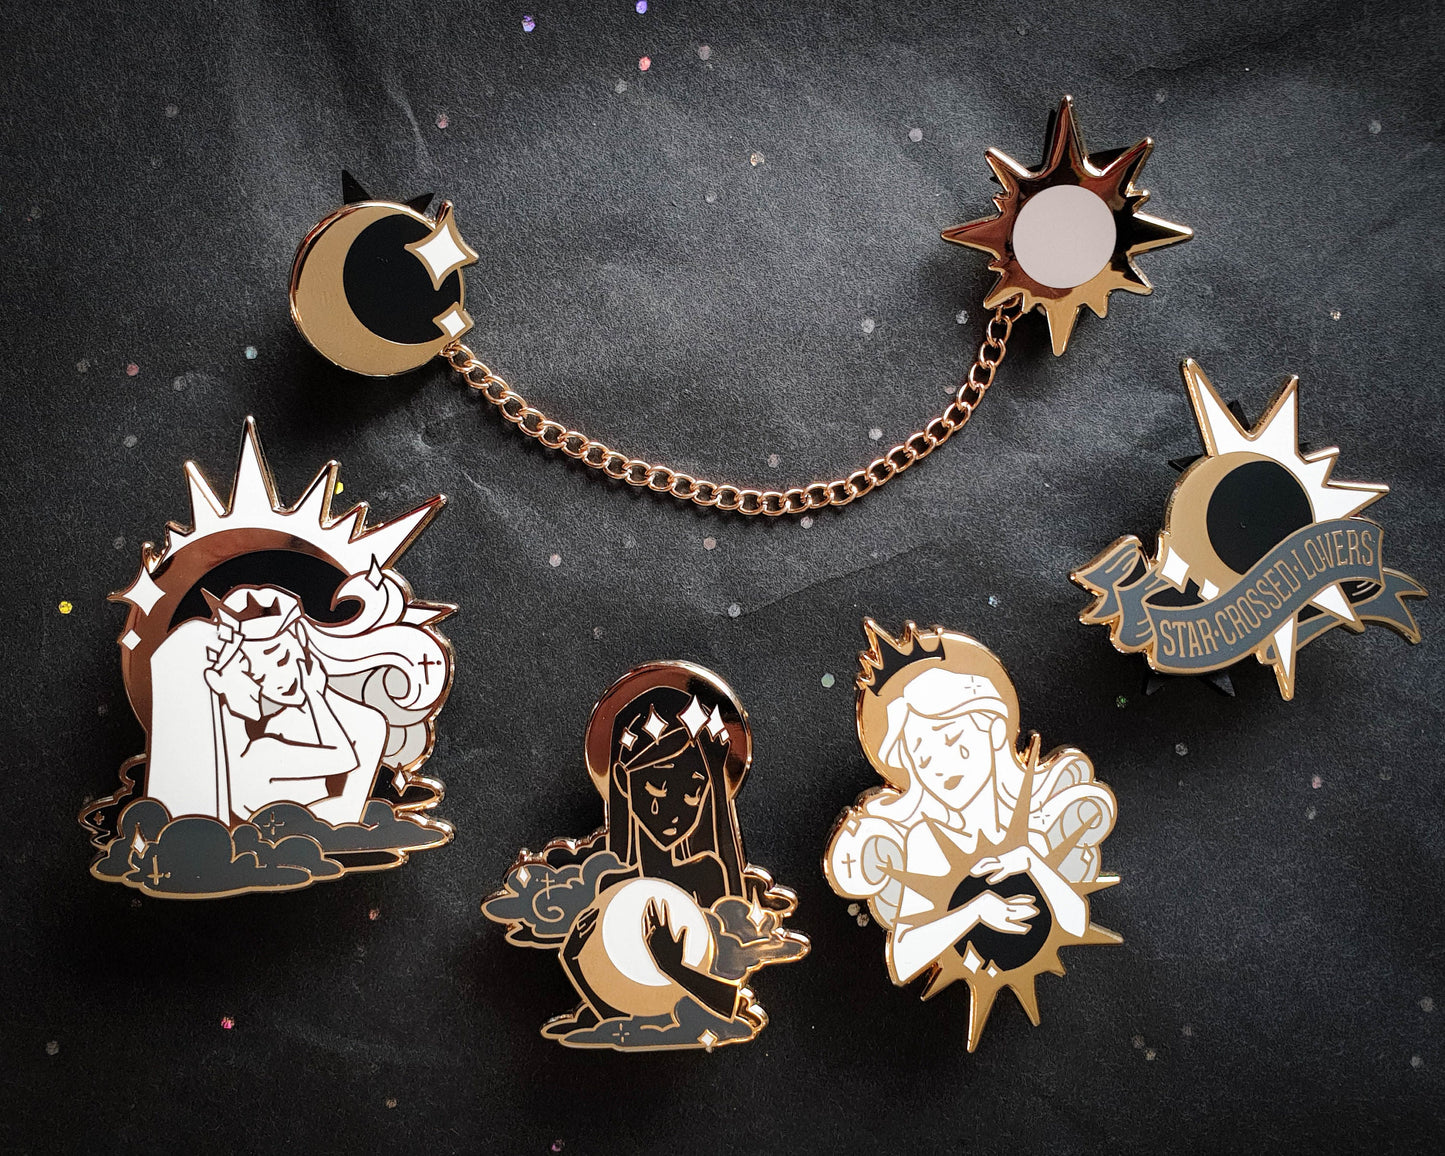 The Sun - Hard Enamel Pin - Star-crossed Lovers (Collaboration by Astermorn and Annadrawsstuff)